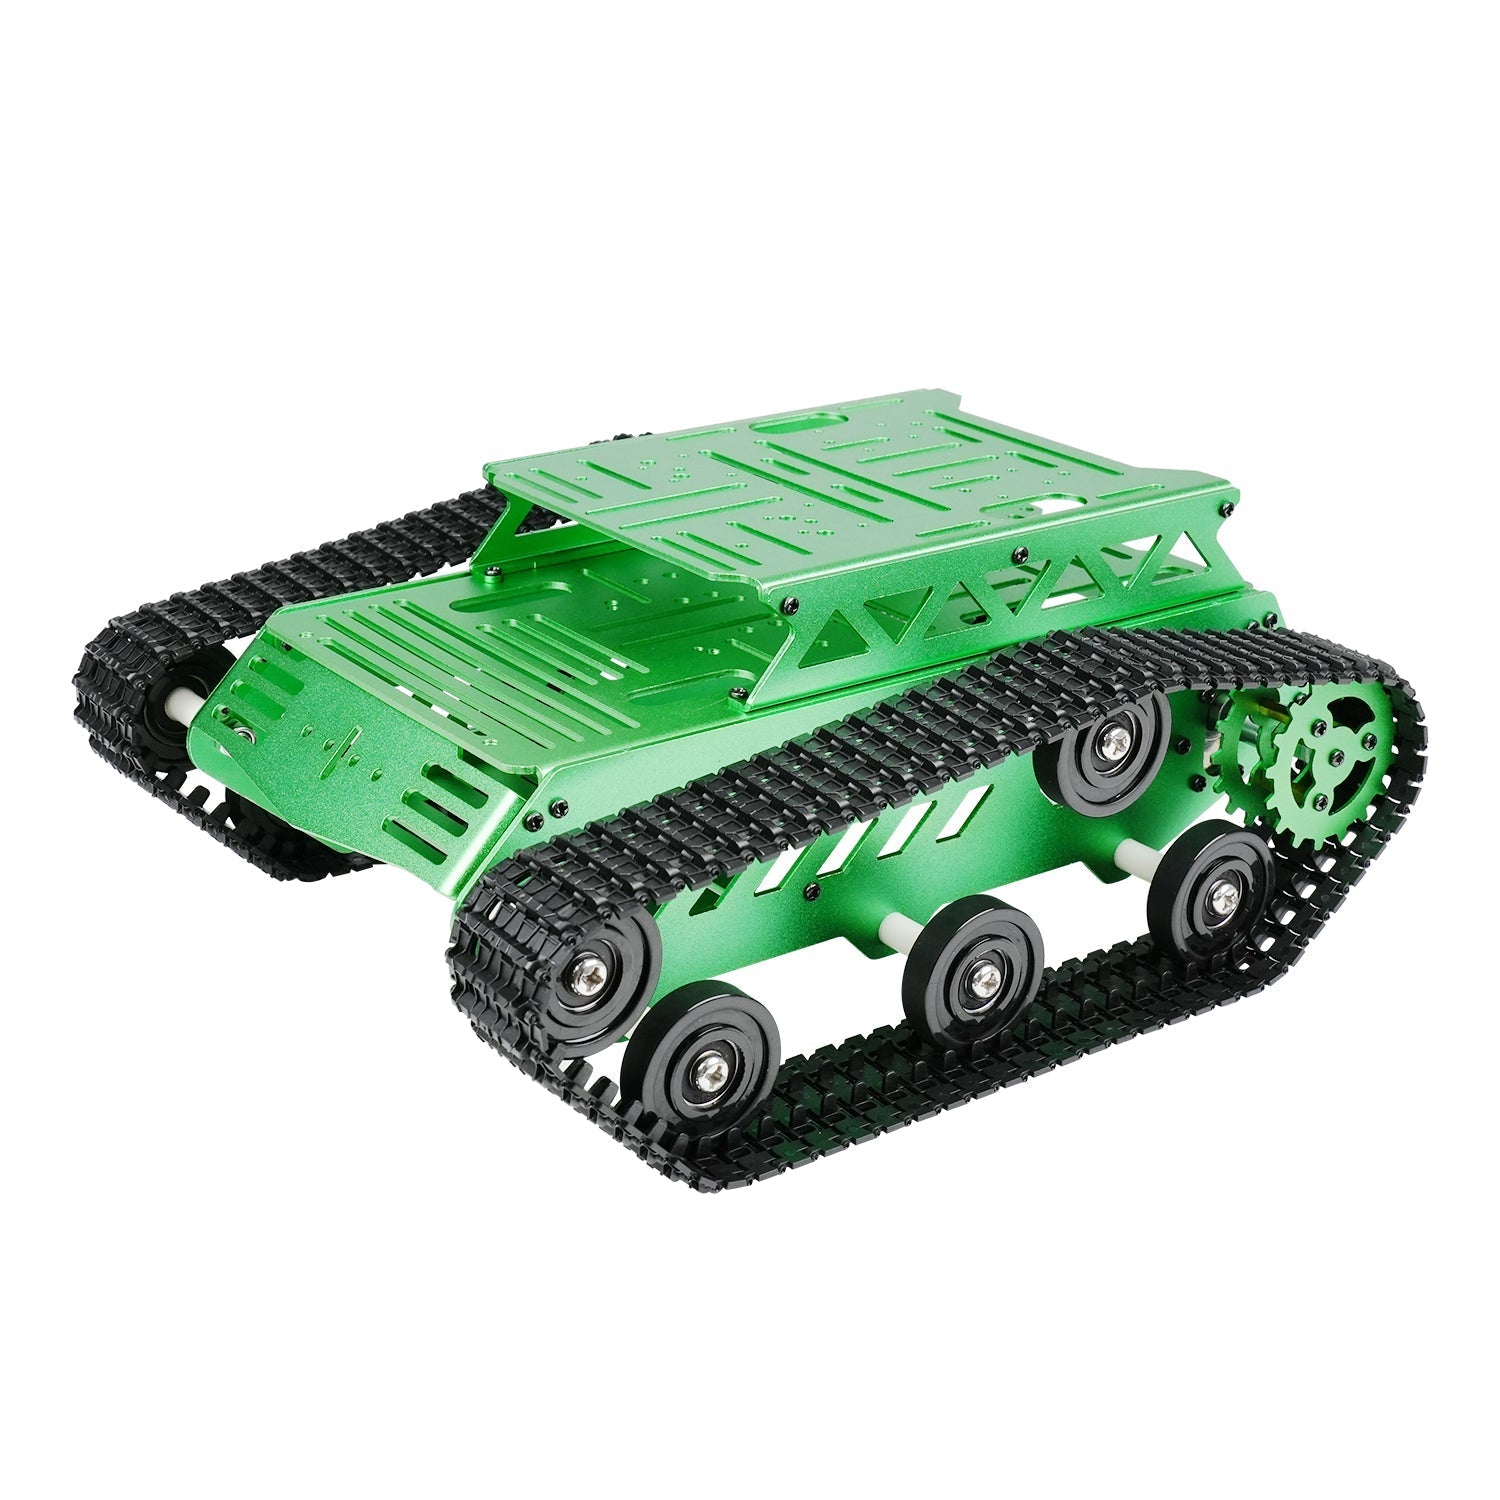 Hiwonder Tank Car Chassis Kit Shock Absorbing Robot with 2WD Motors for Arduino/ Raspberry Pi/ Jetson Nano DIY Robotic Car Learning Kit (Green)